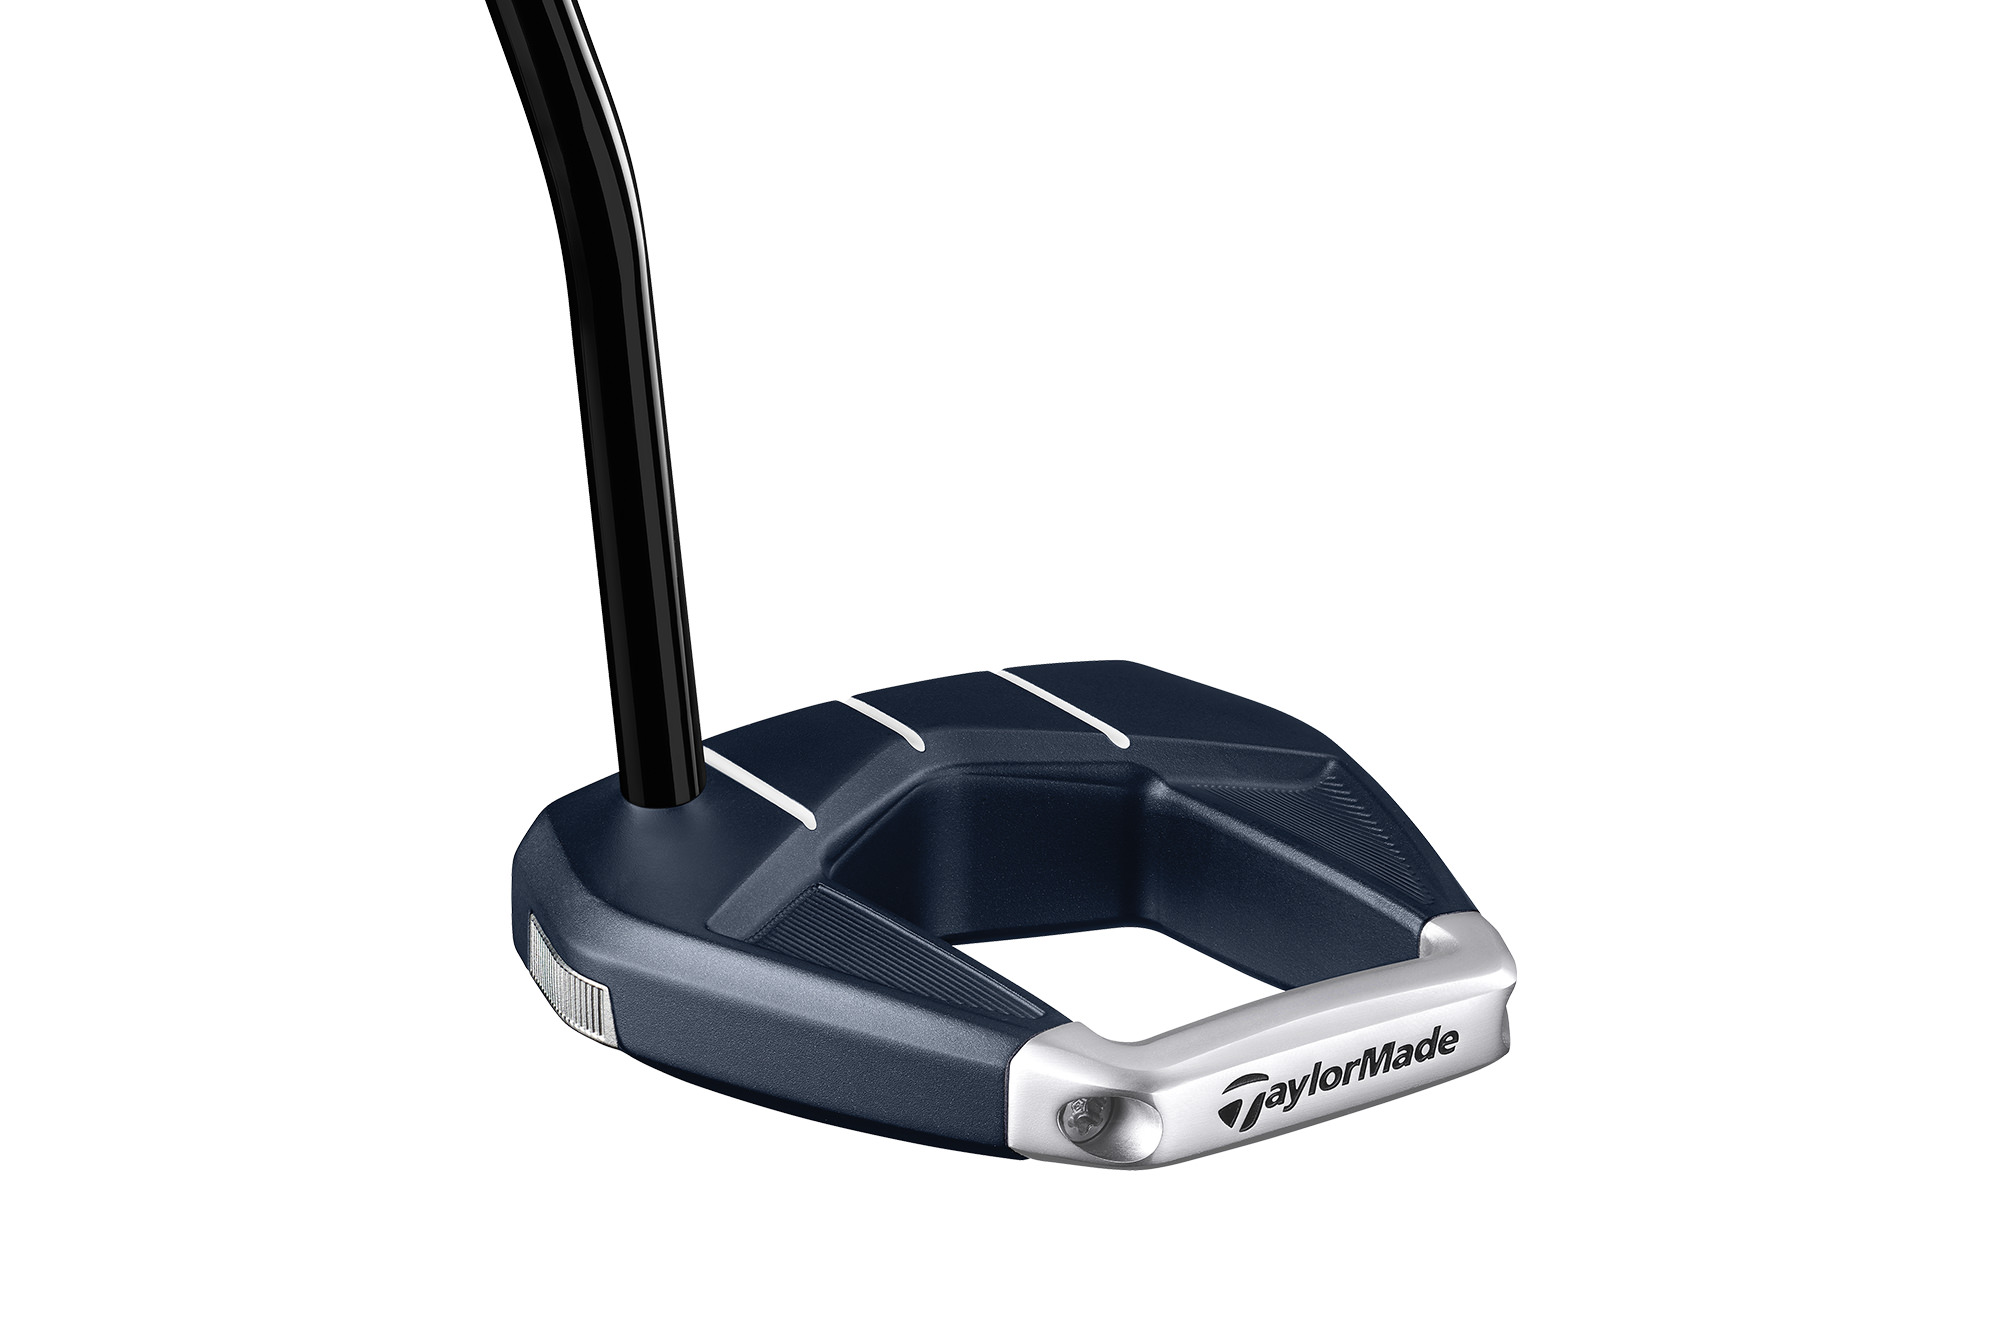 New TaylorMade putters